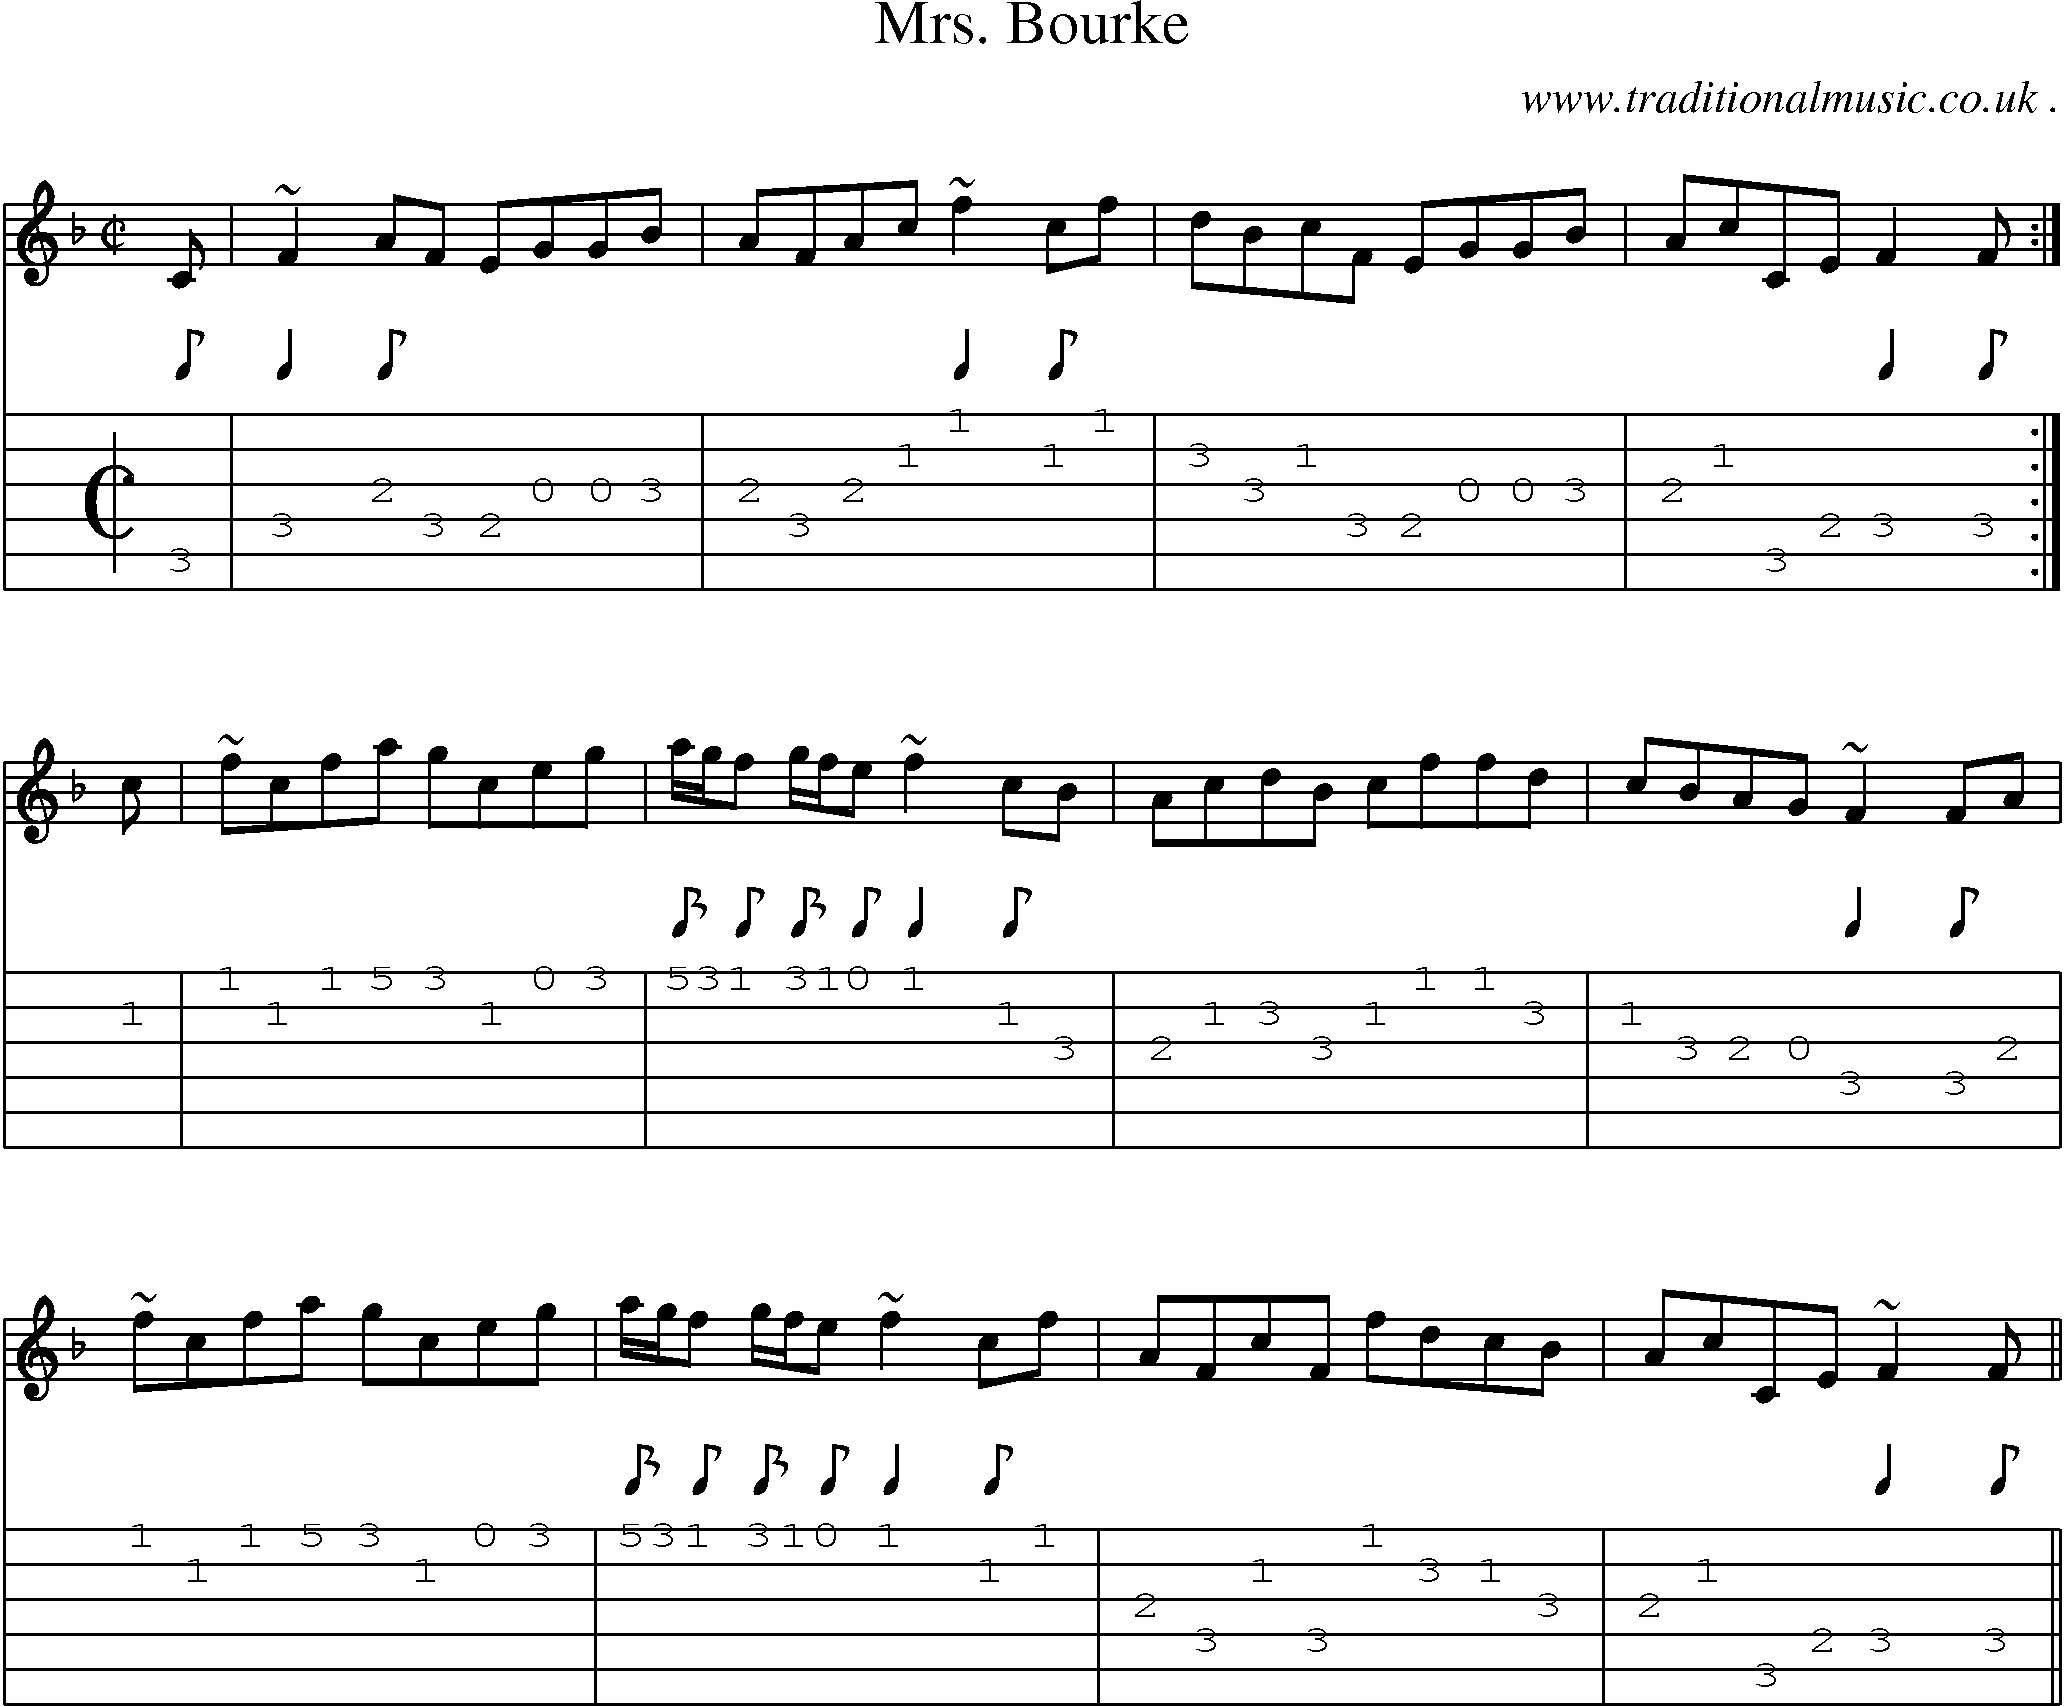 Sheet-music  score, Chords and Guitar Tabs for Mrs Bourke